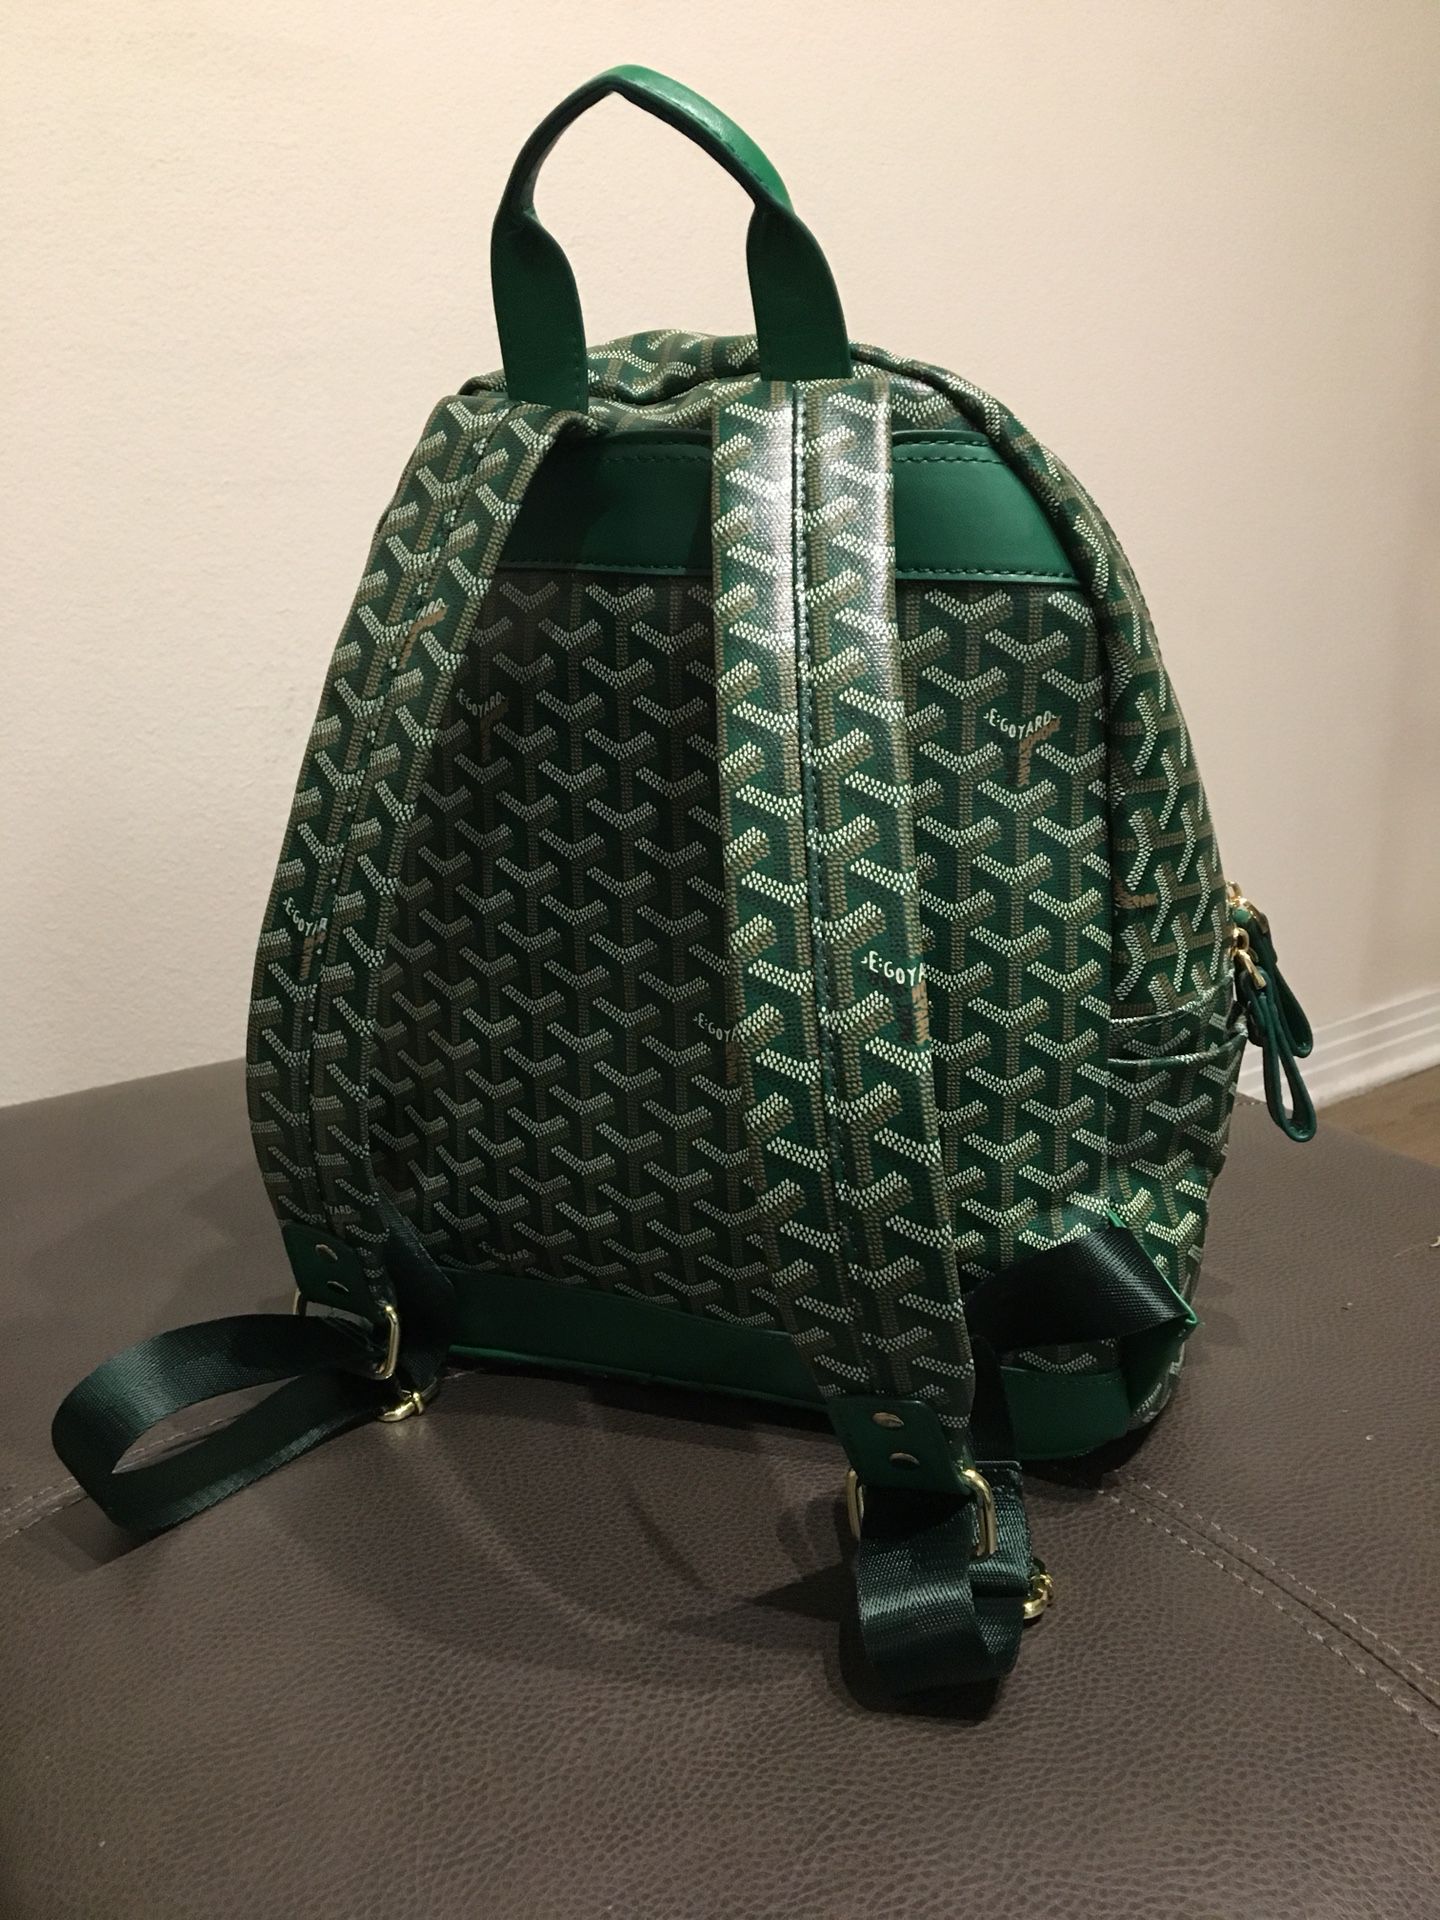 Goyard Backpacks in Nigeria for sale ▷ Prices on